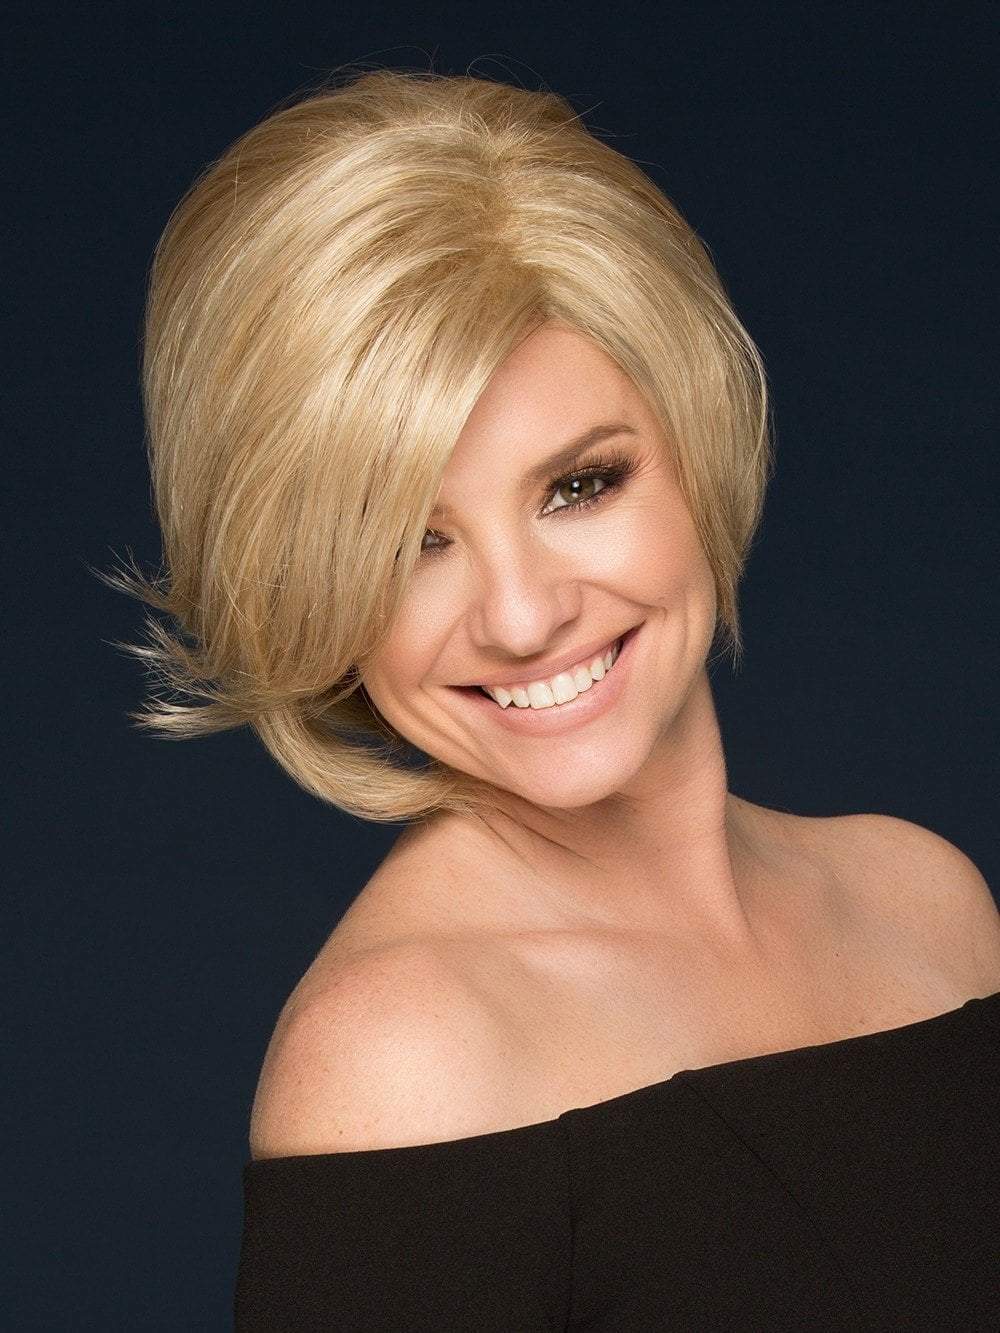 Inexpensive wigs that look real | Wigoutlet.com